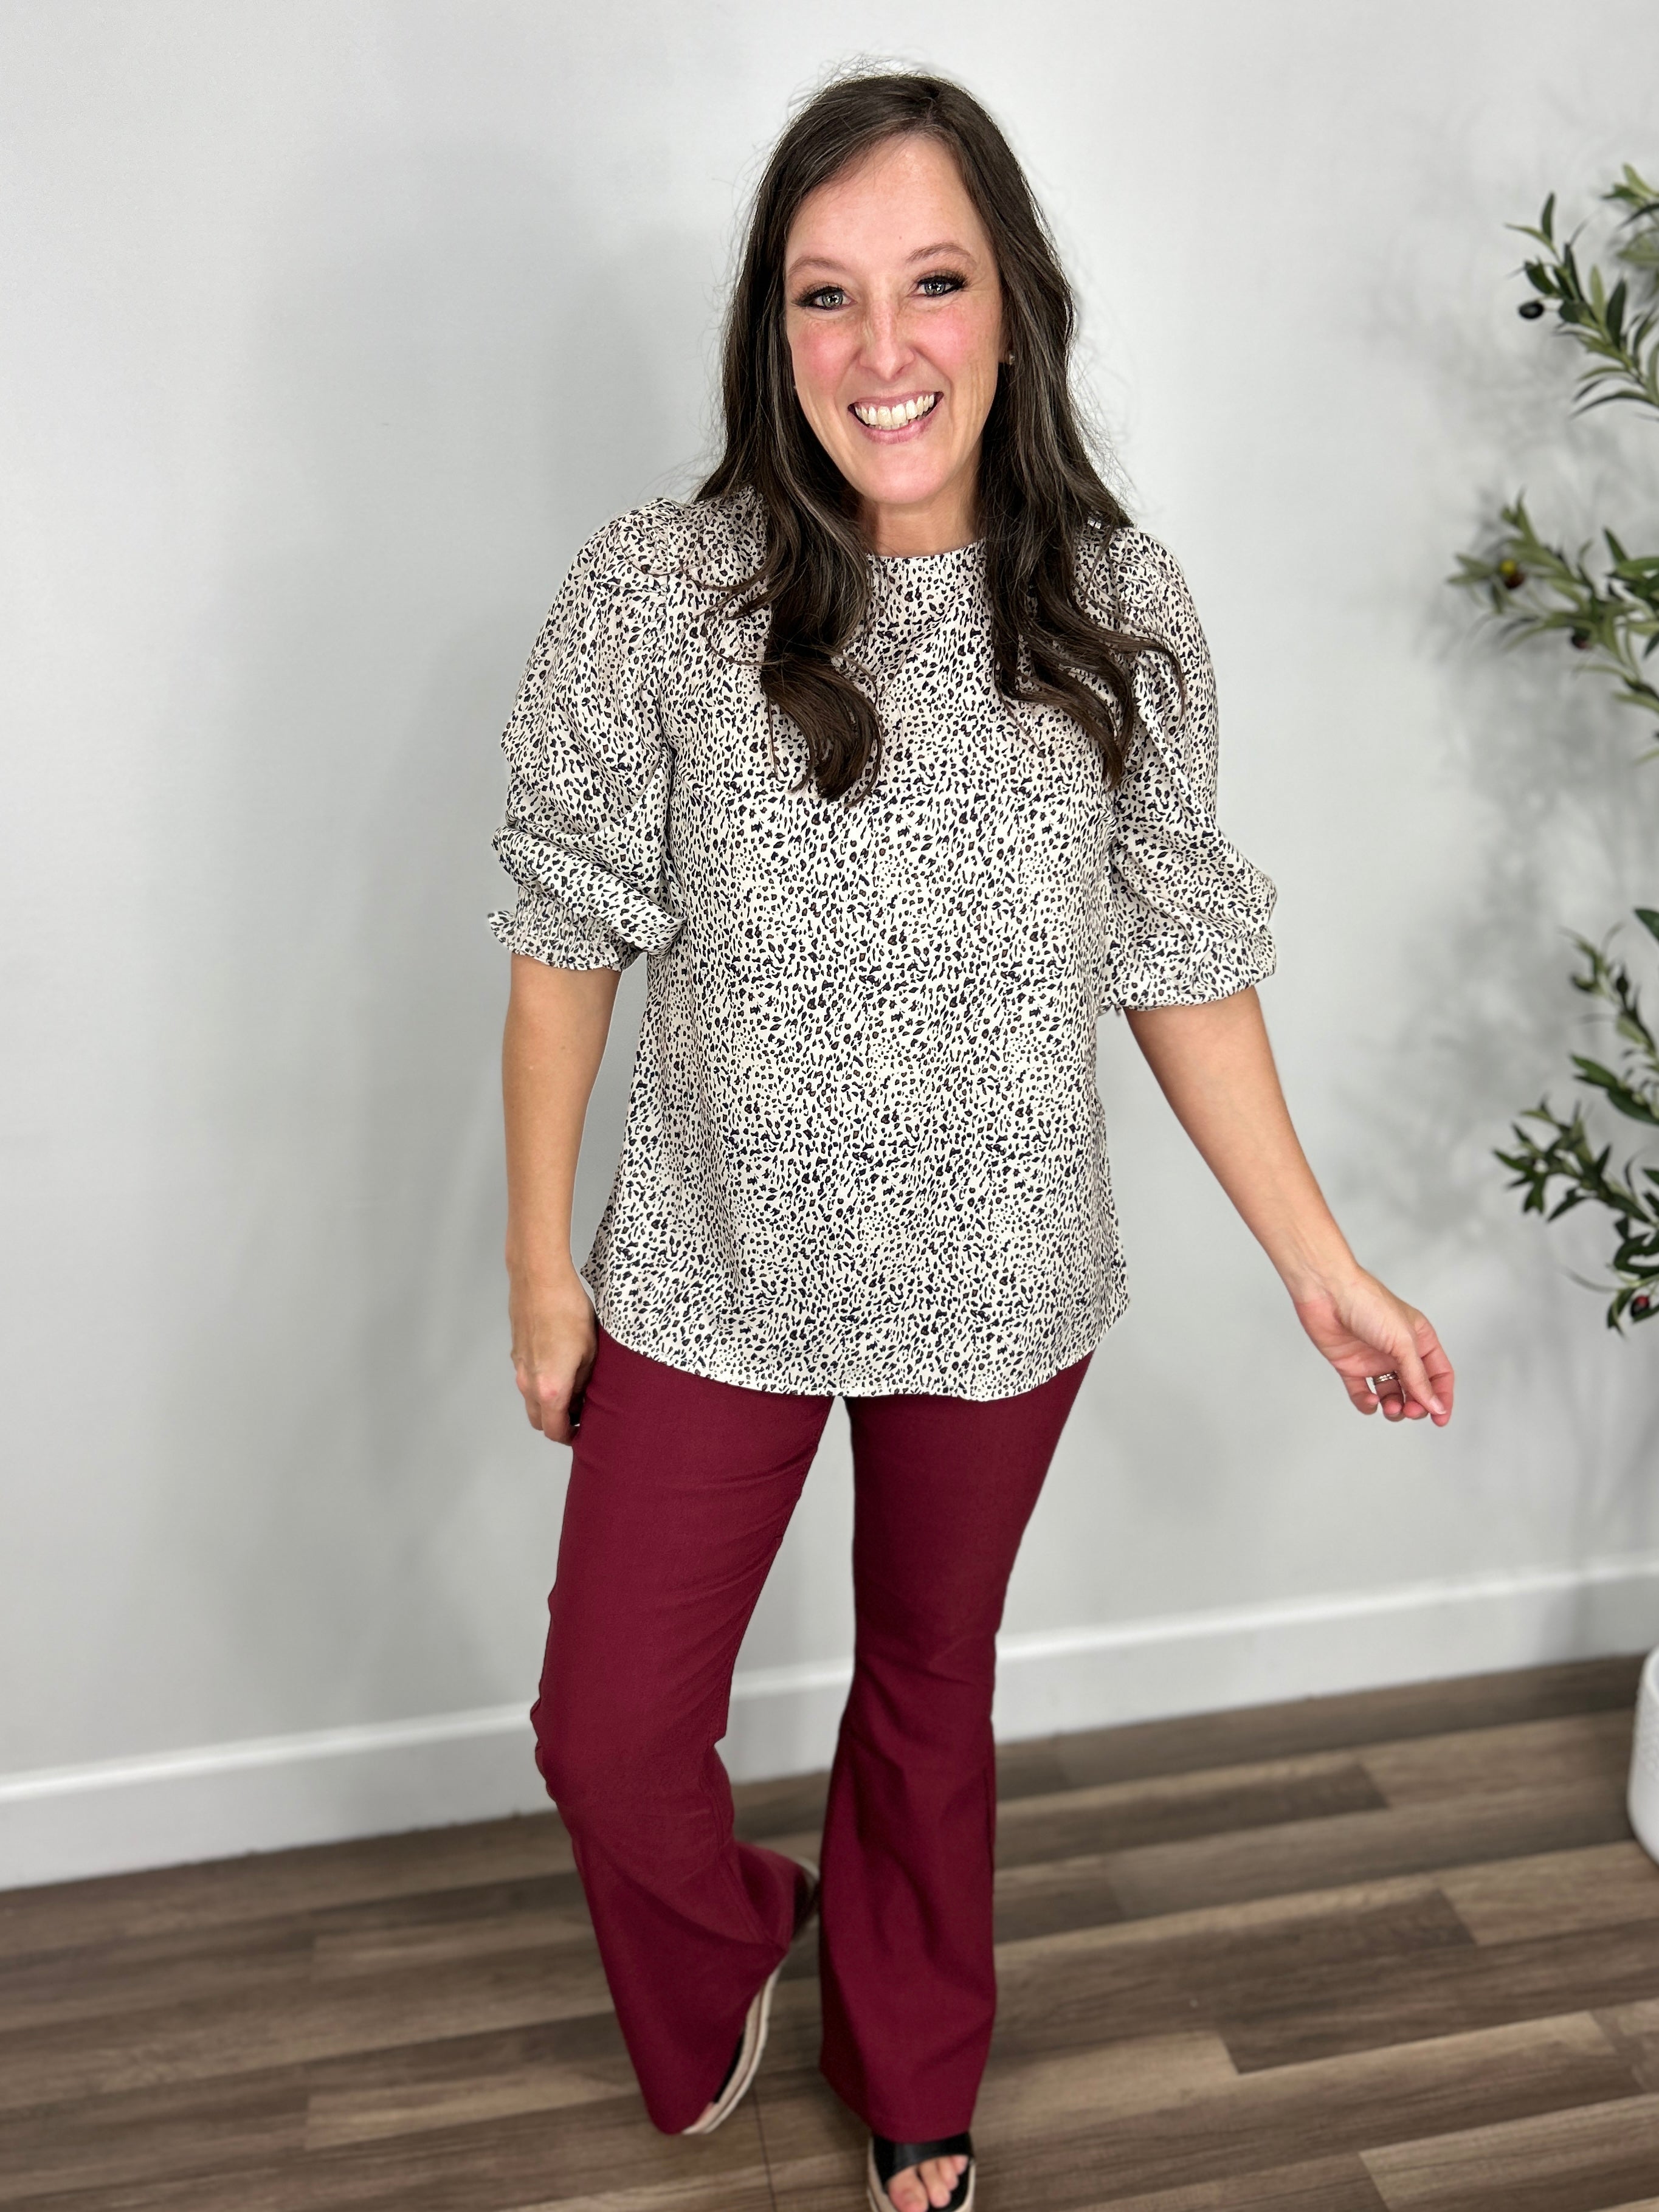 women's small leopard print 3/4 sleeve top paired with maroon flare pants and black wedge sandals.